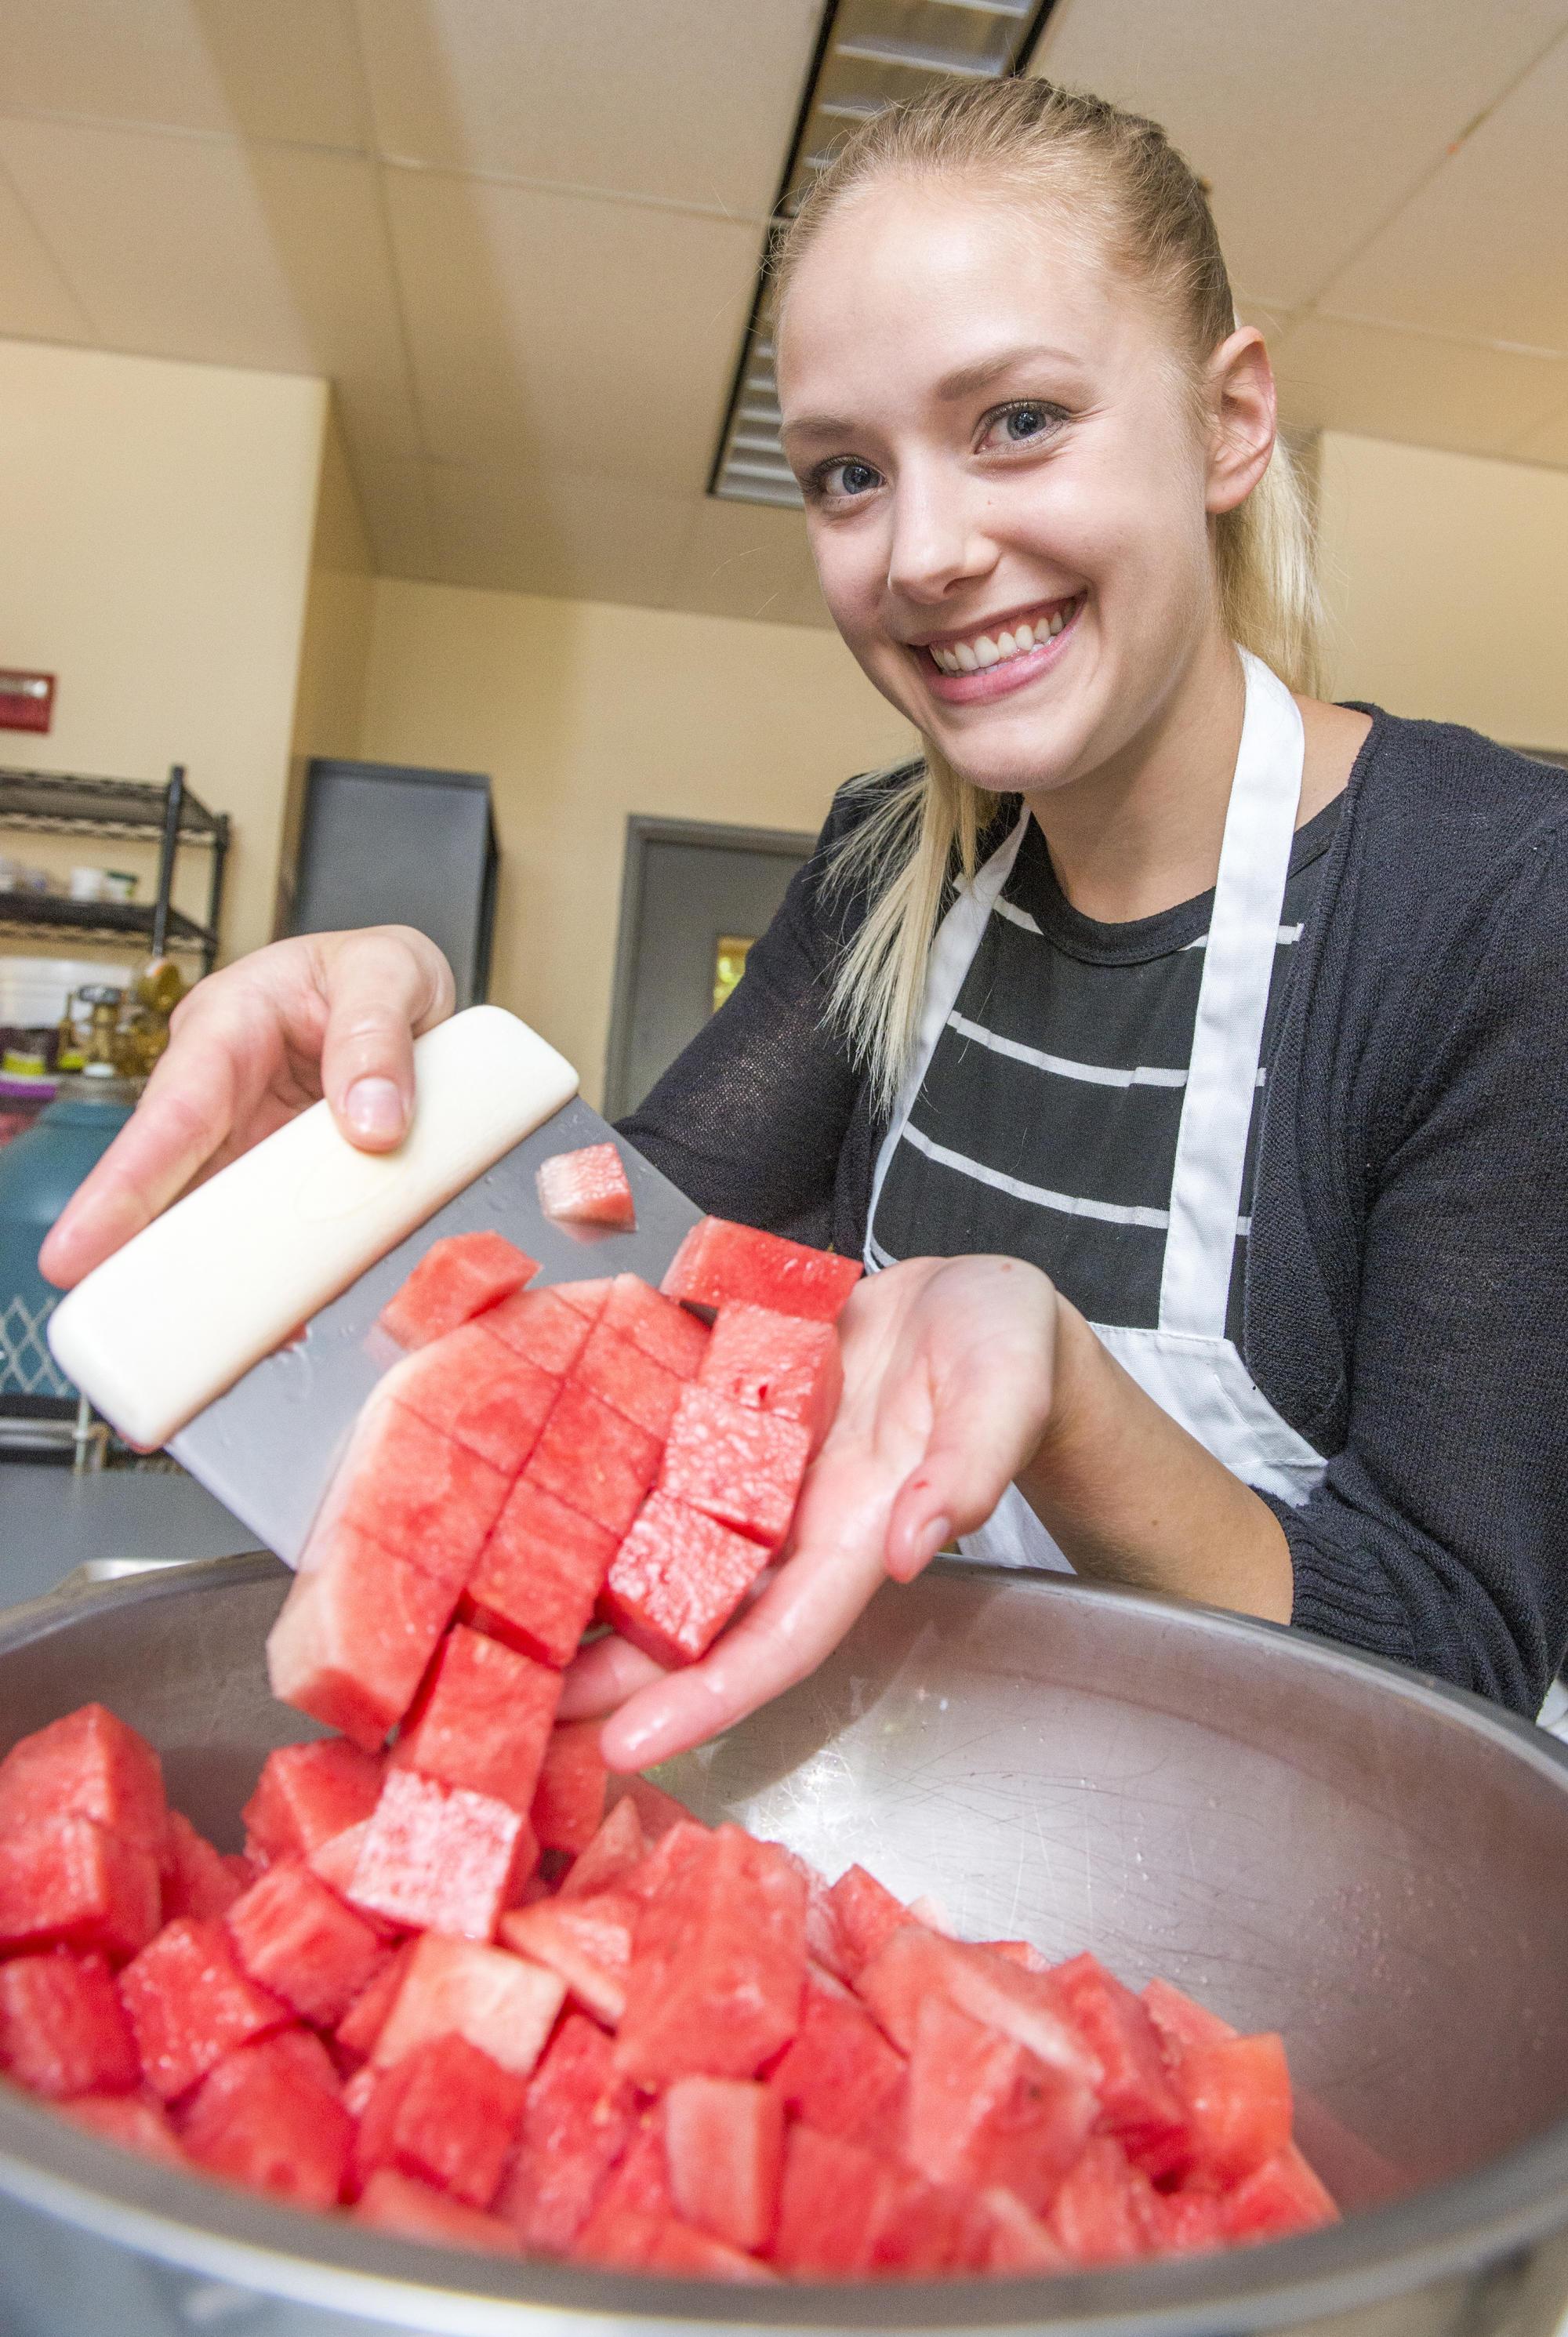 Student cutting watermelon and putting in a bowl